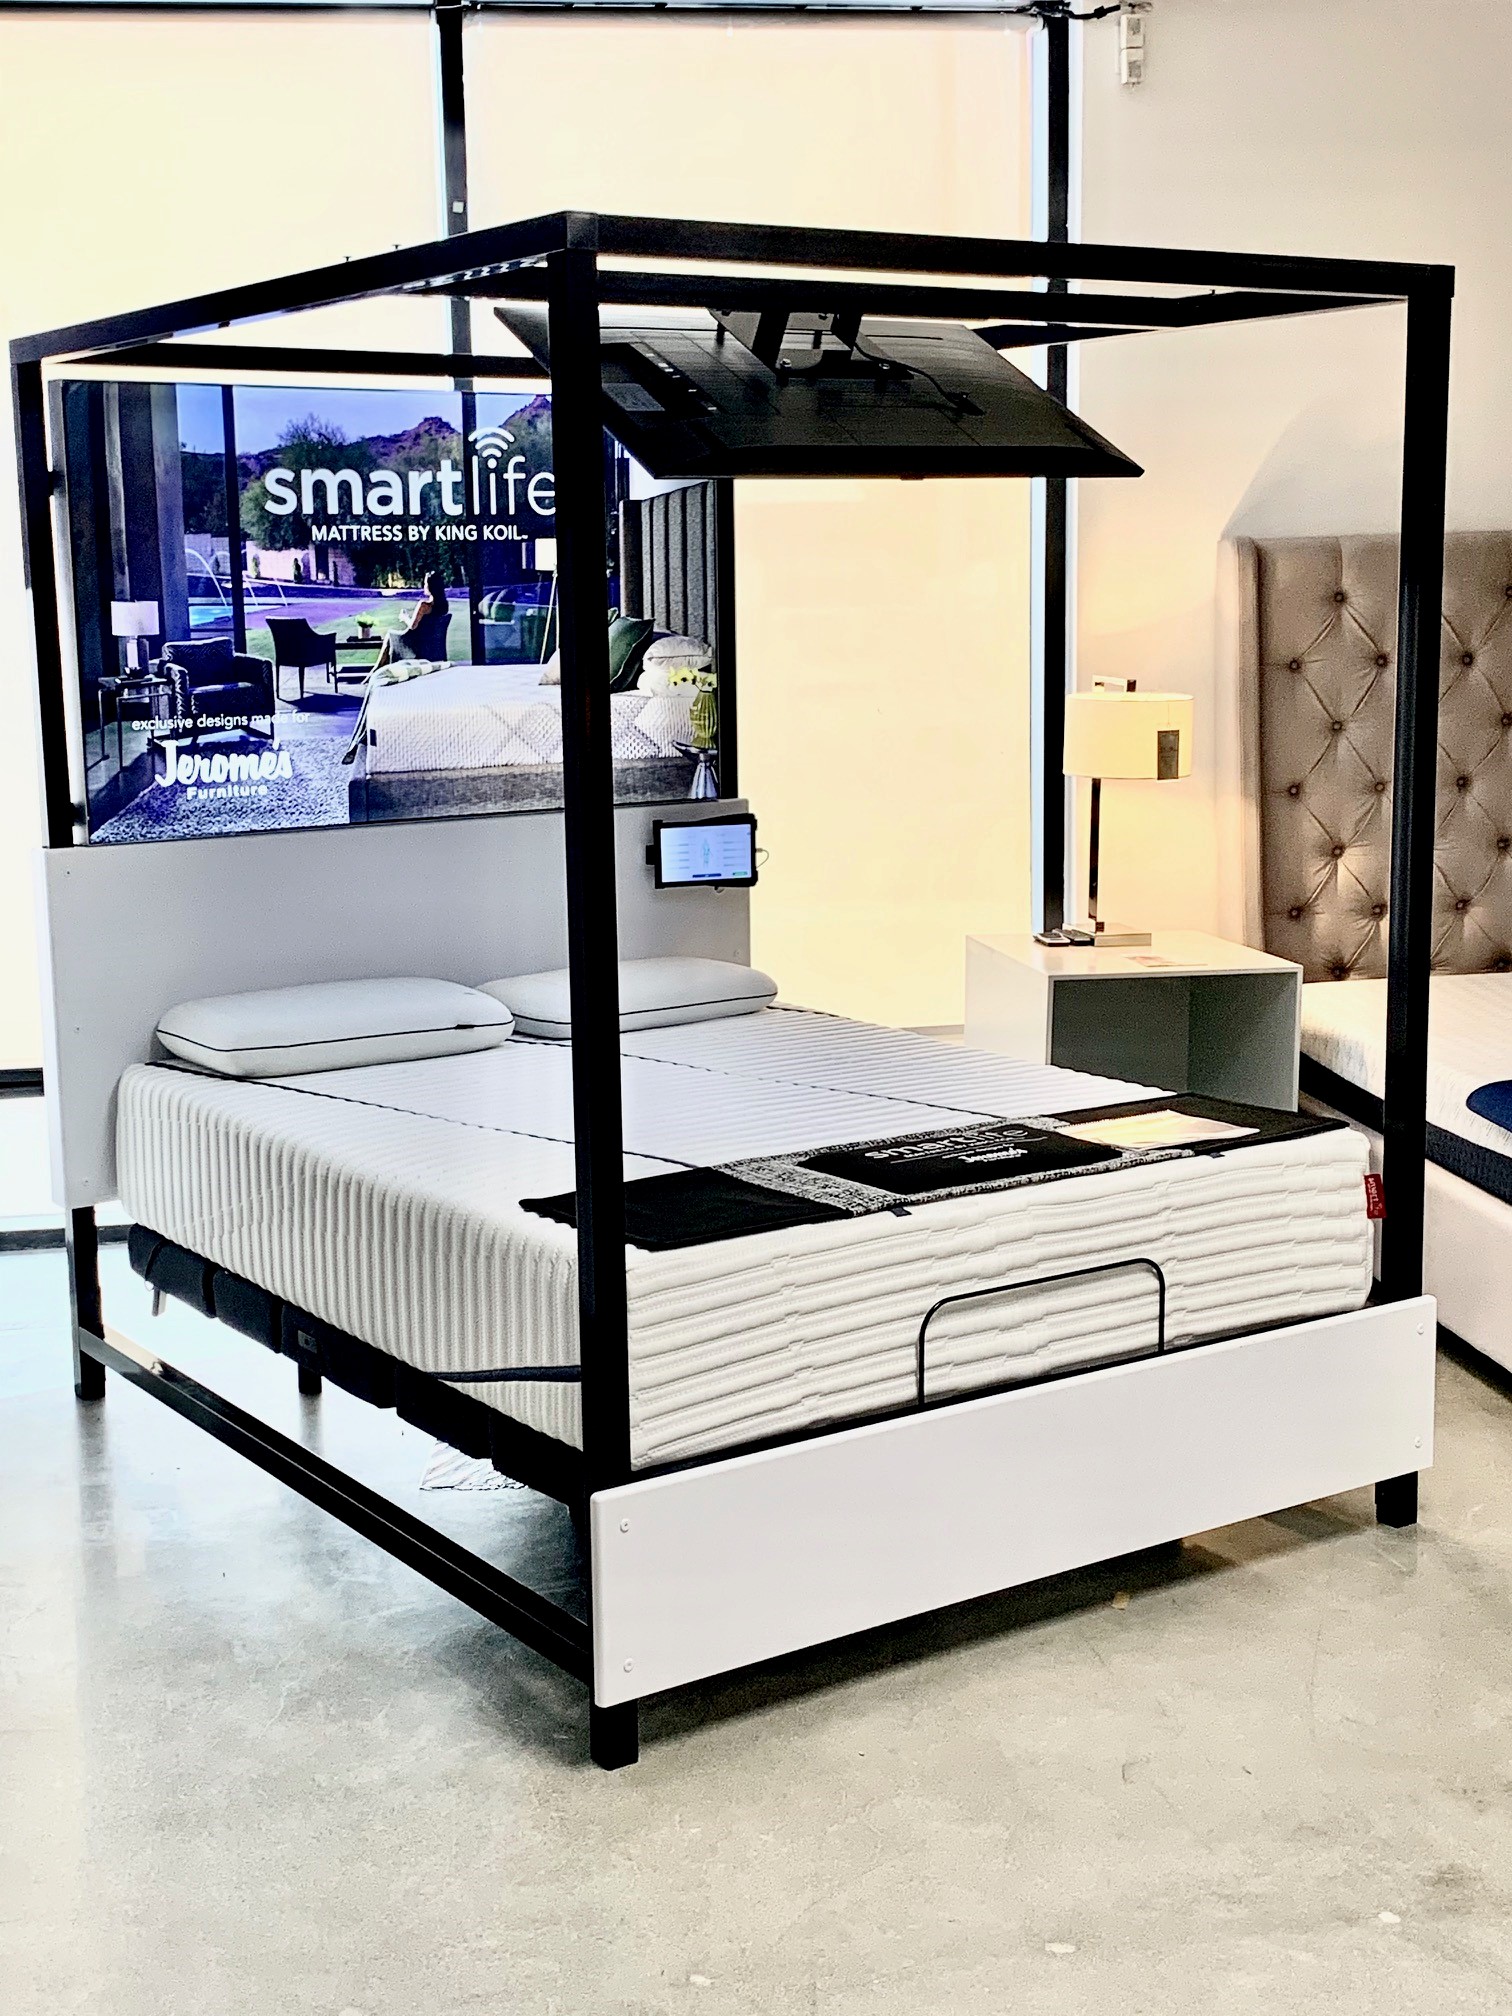 Smartlife Mattress By King Koil Experience